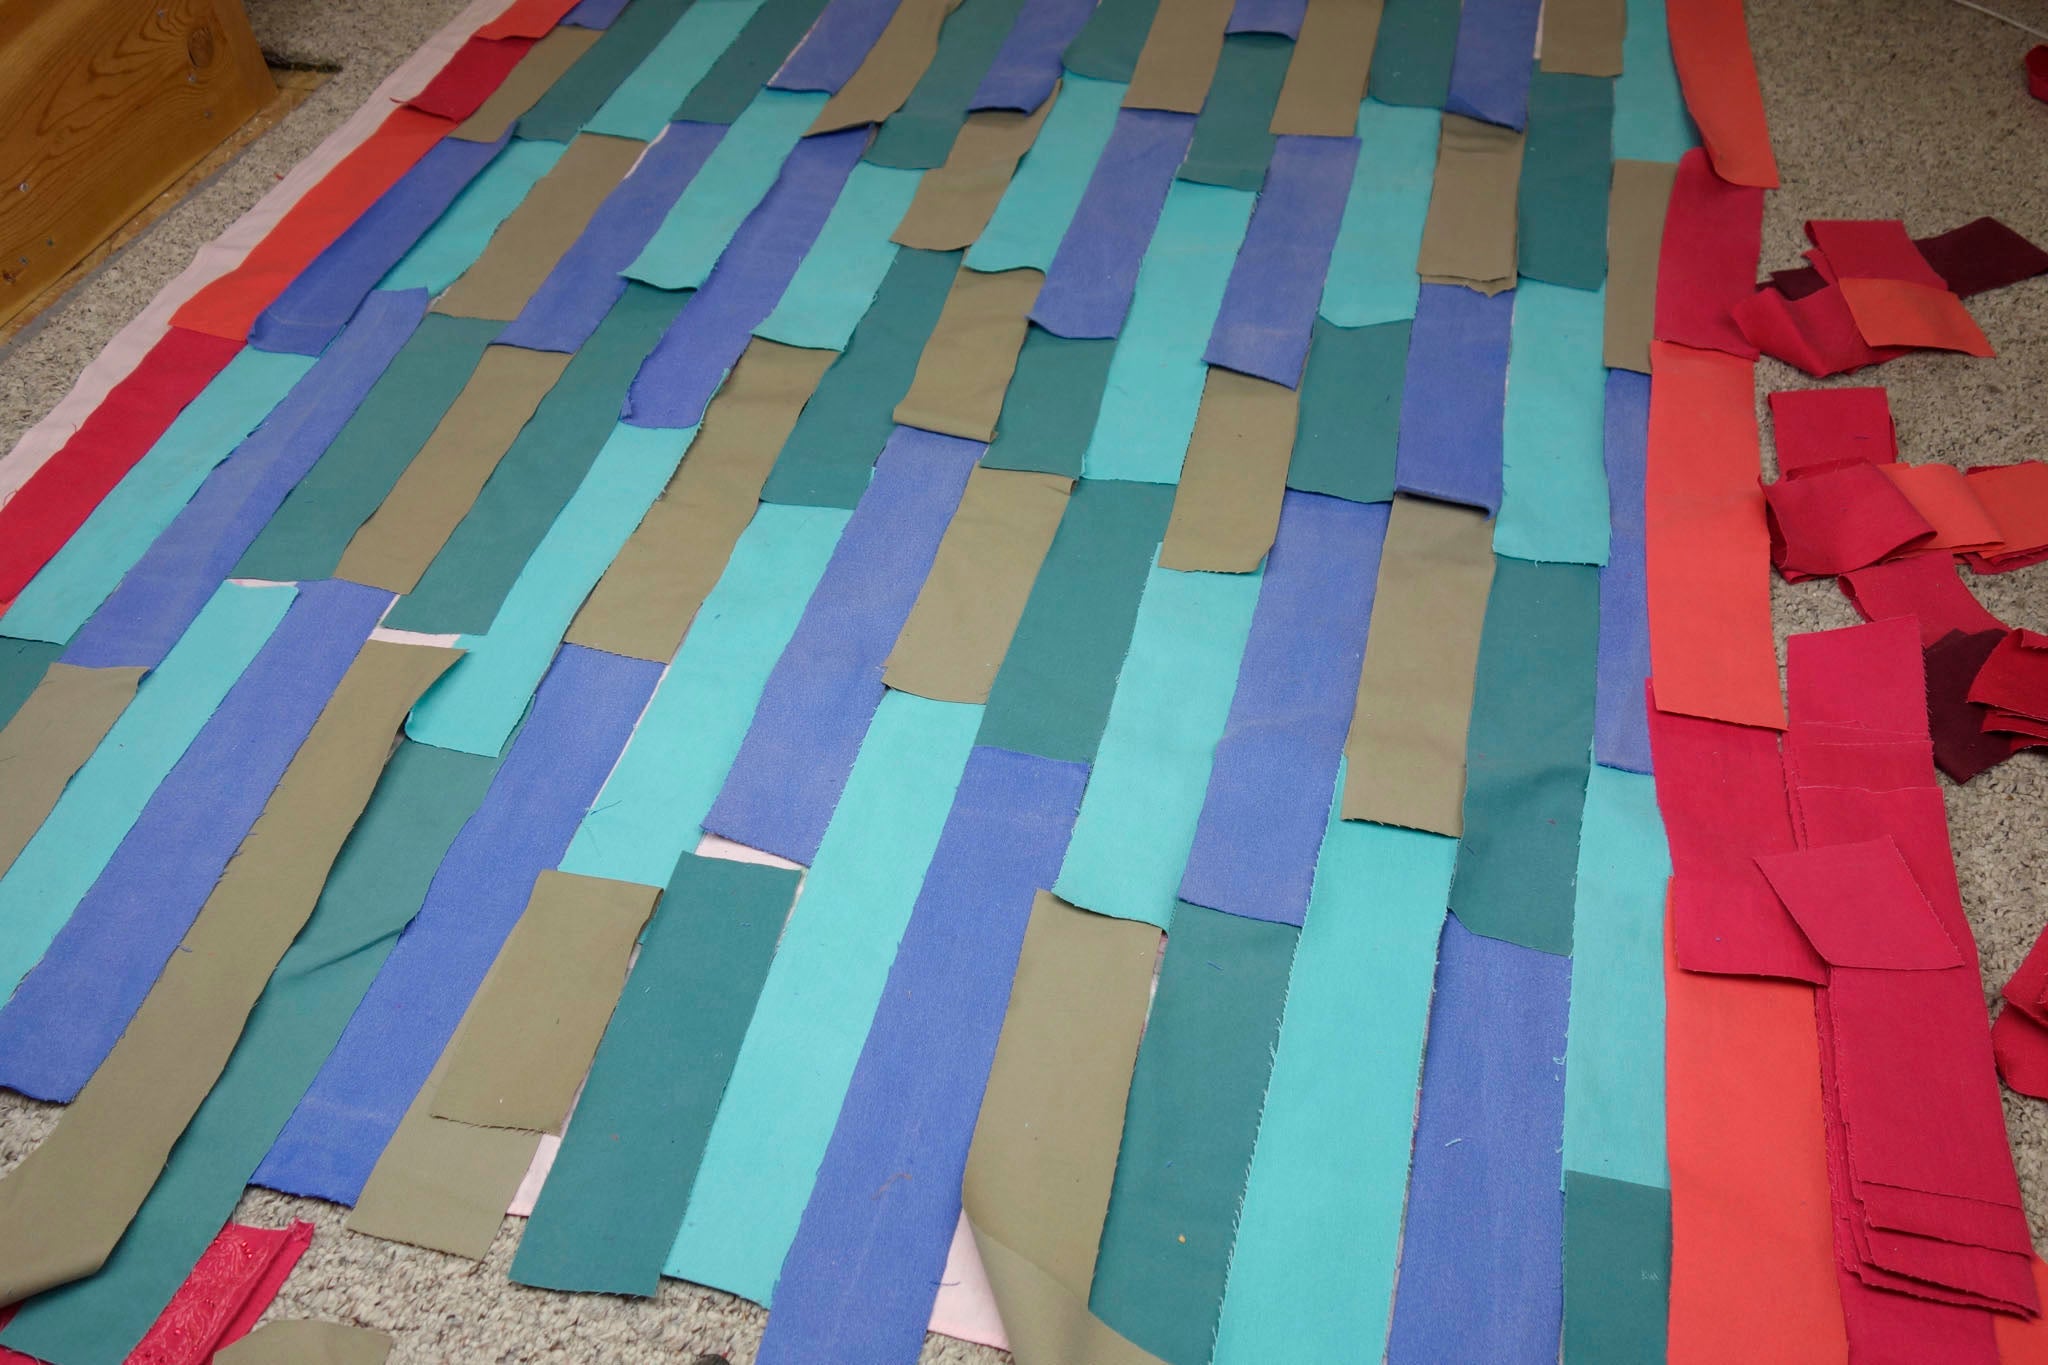 Progress on a Stitch & Flip 2.0 quilt made by Patricia Belyea of Okan Arts